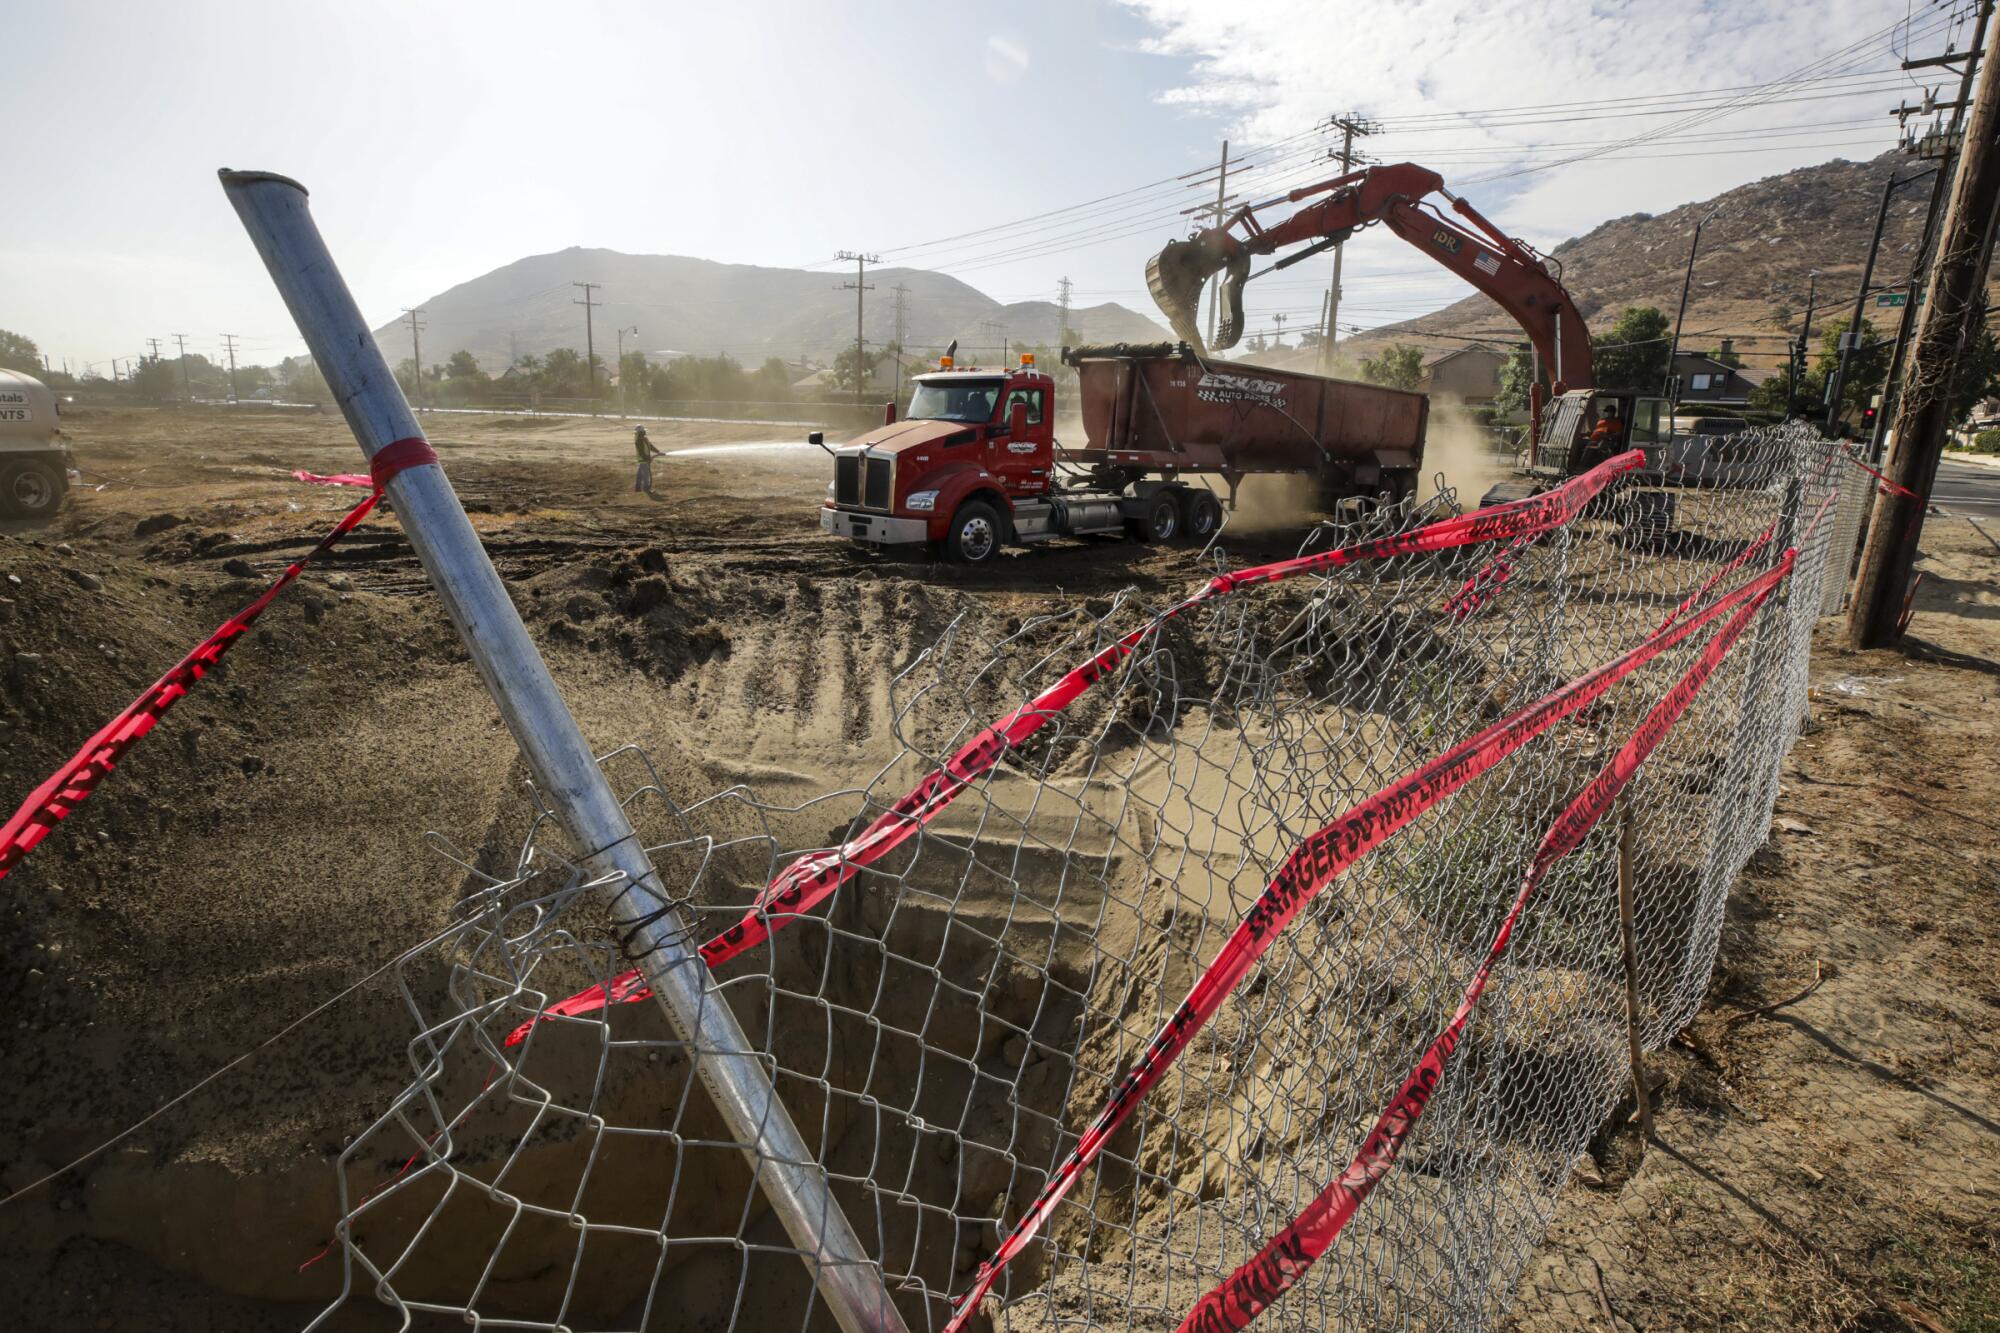 Construction vehicles are seen near a hole dug at a worksite